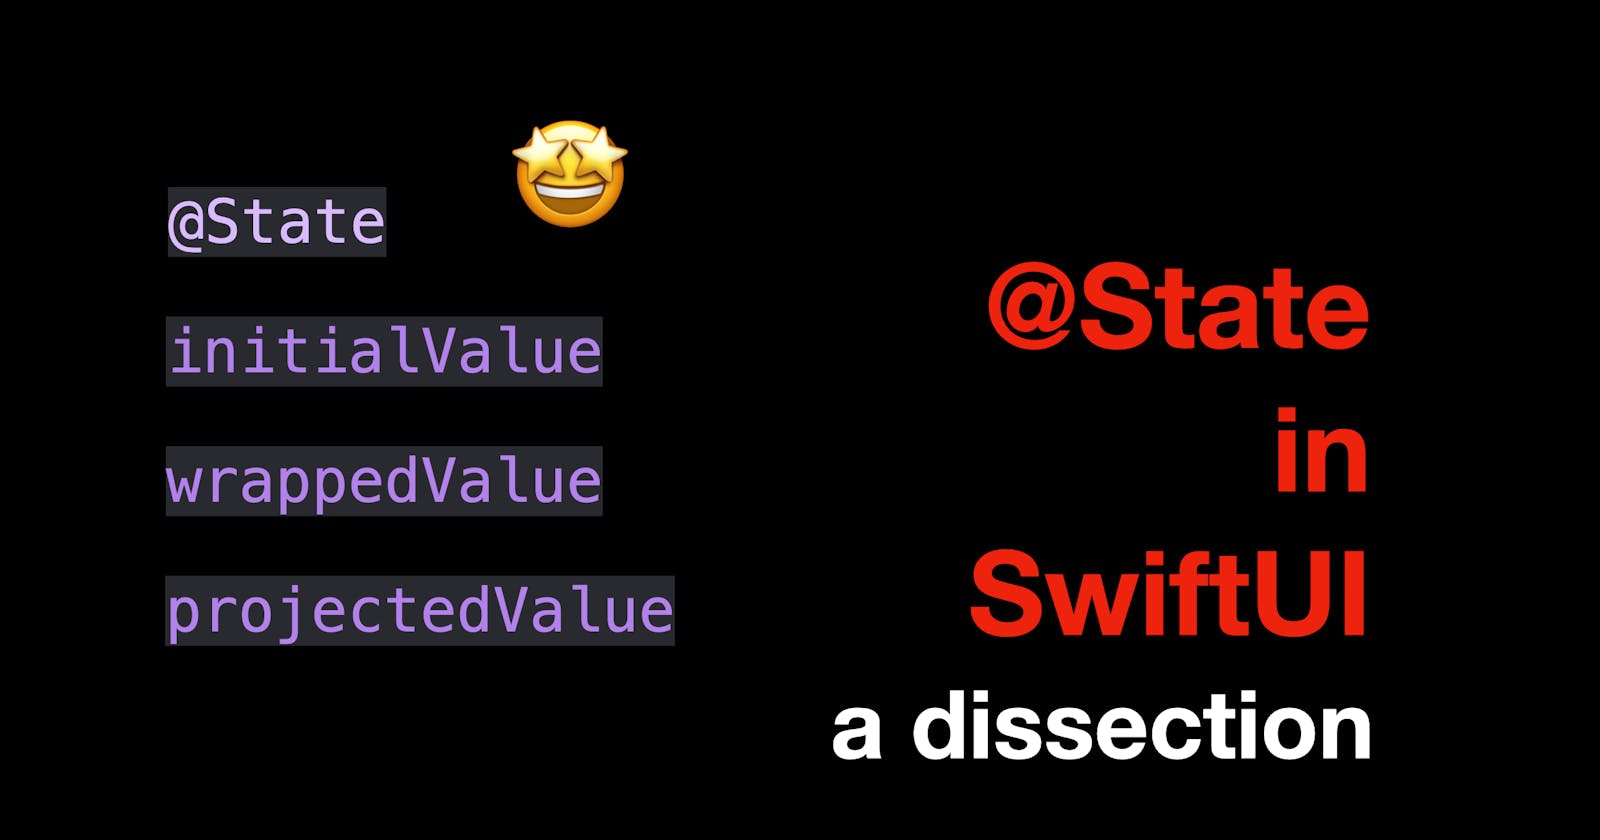 @State in SwiftUI